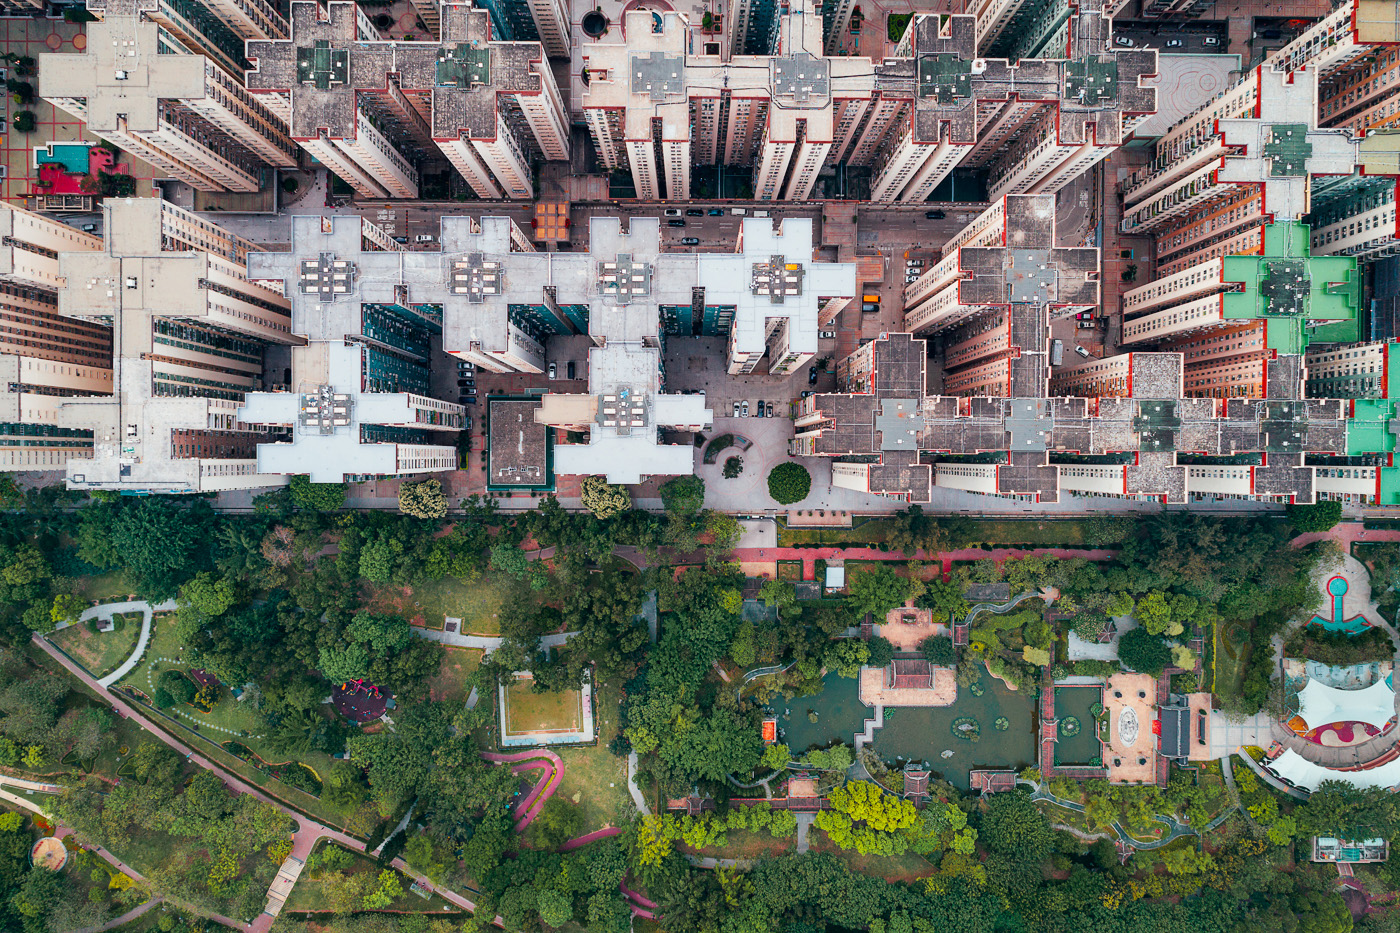 Hong Kong Looks Beautifully Uncanny When Seen From The Sky